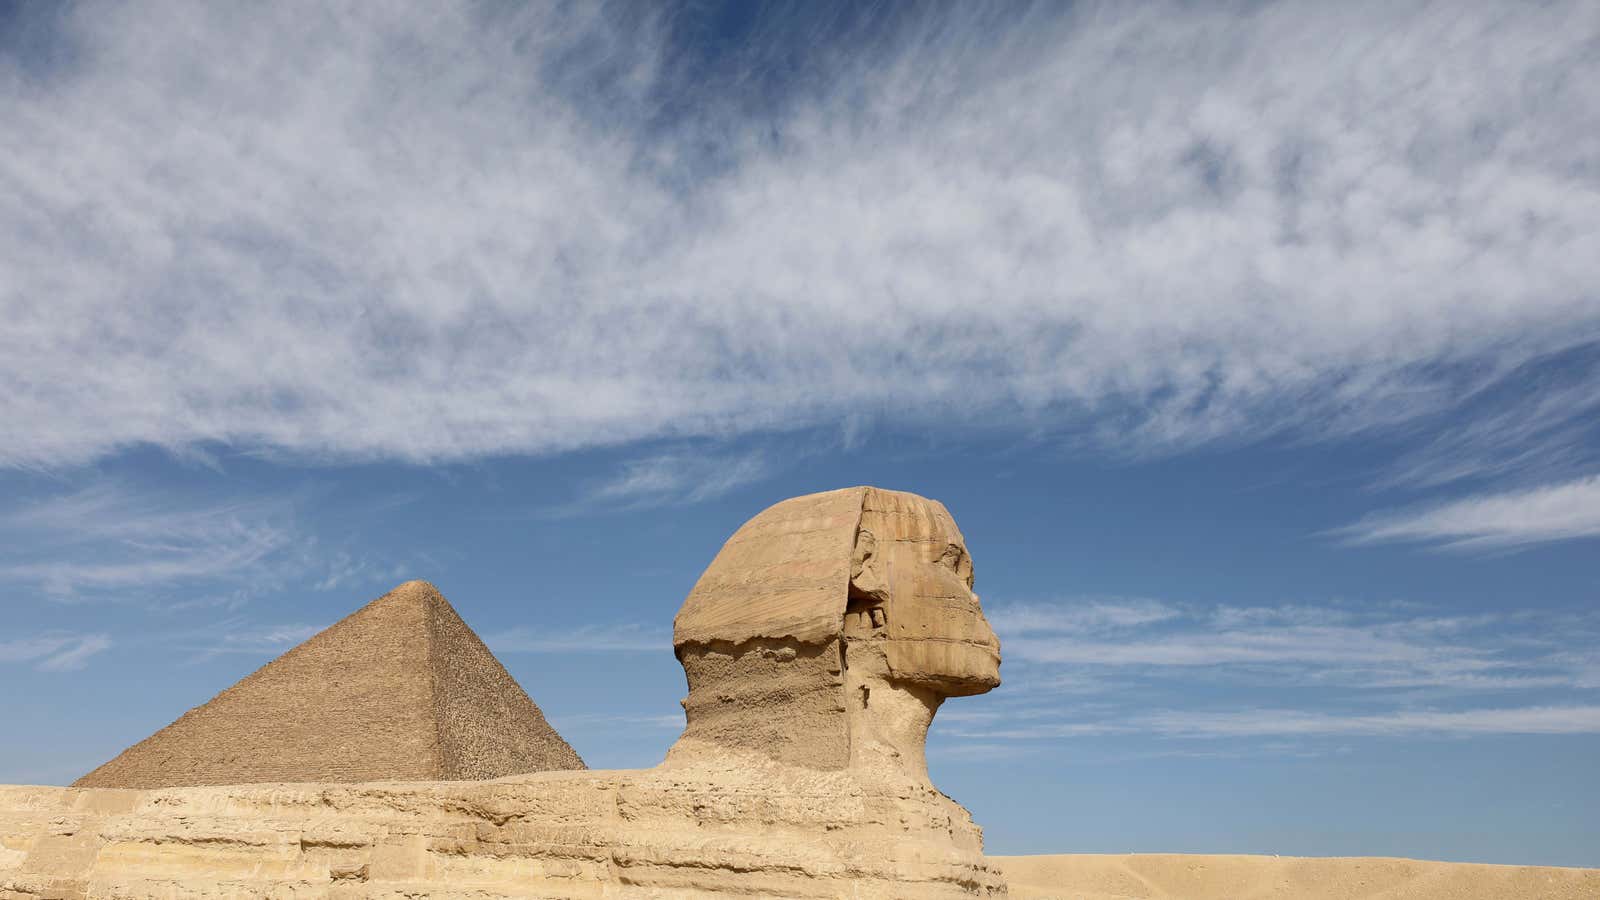 The great pyramids and sphynx.